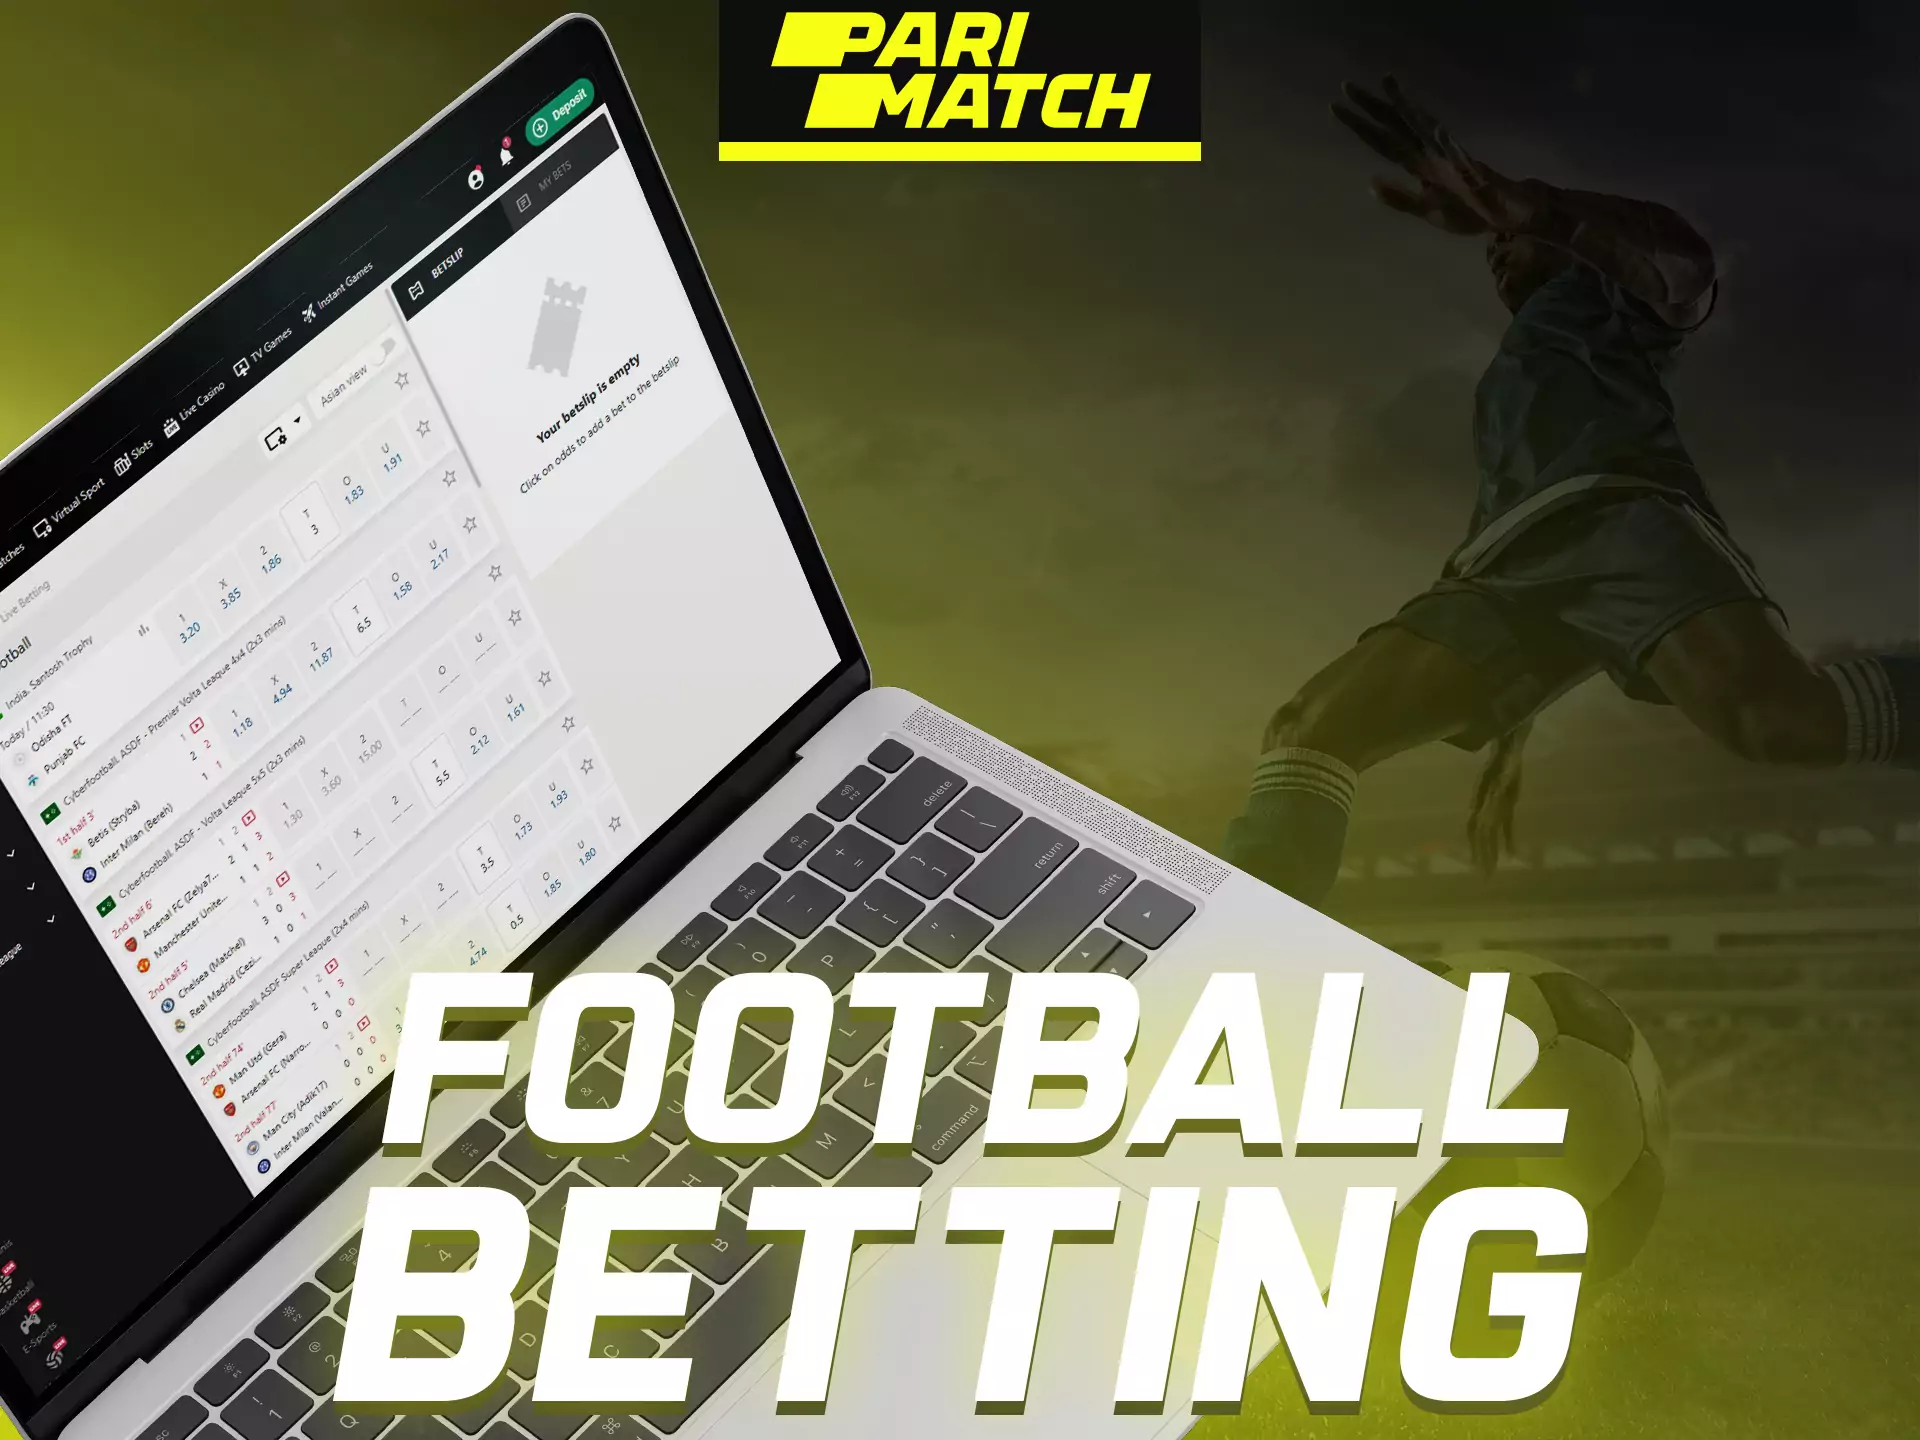 Win money by betting on legendary football teams at Parimatch.